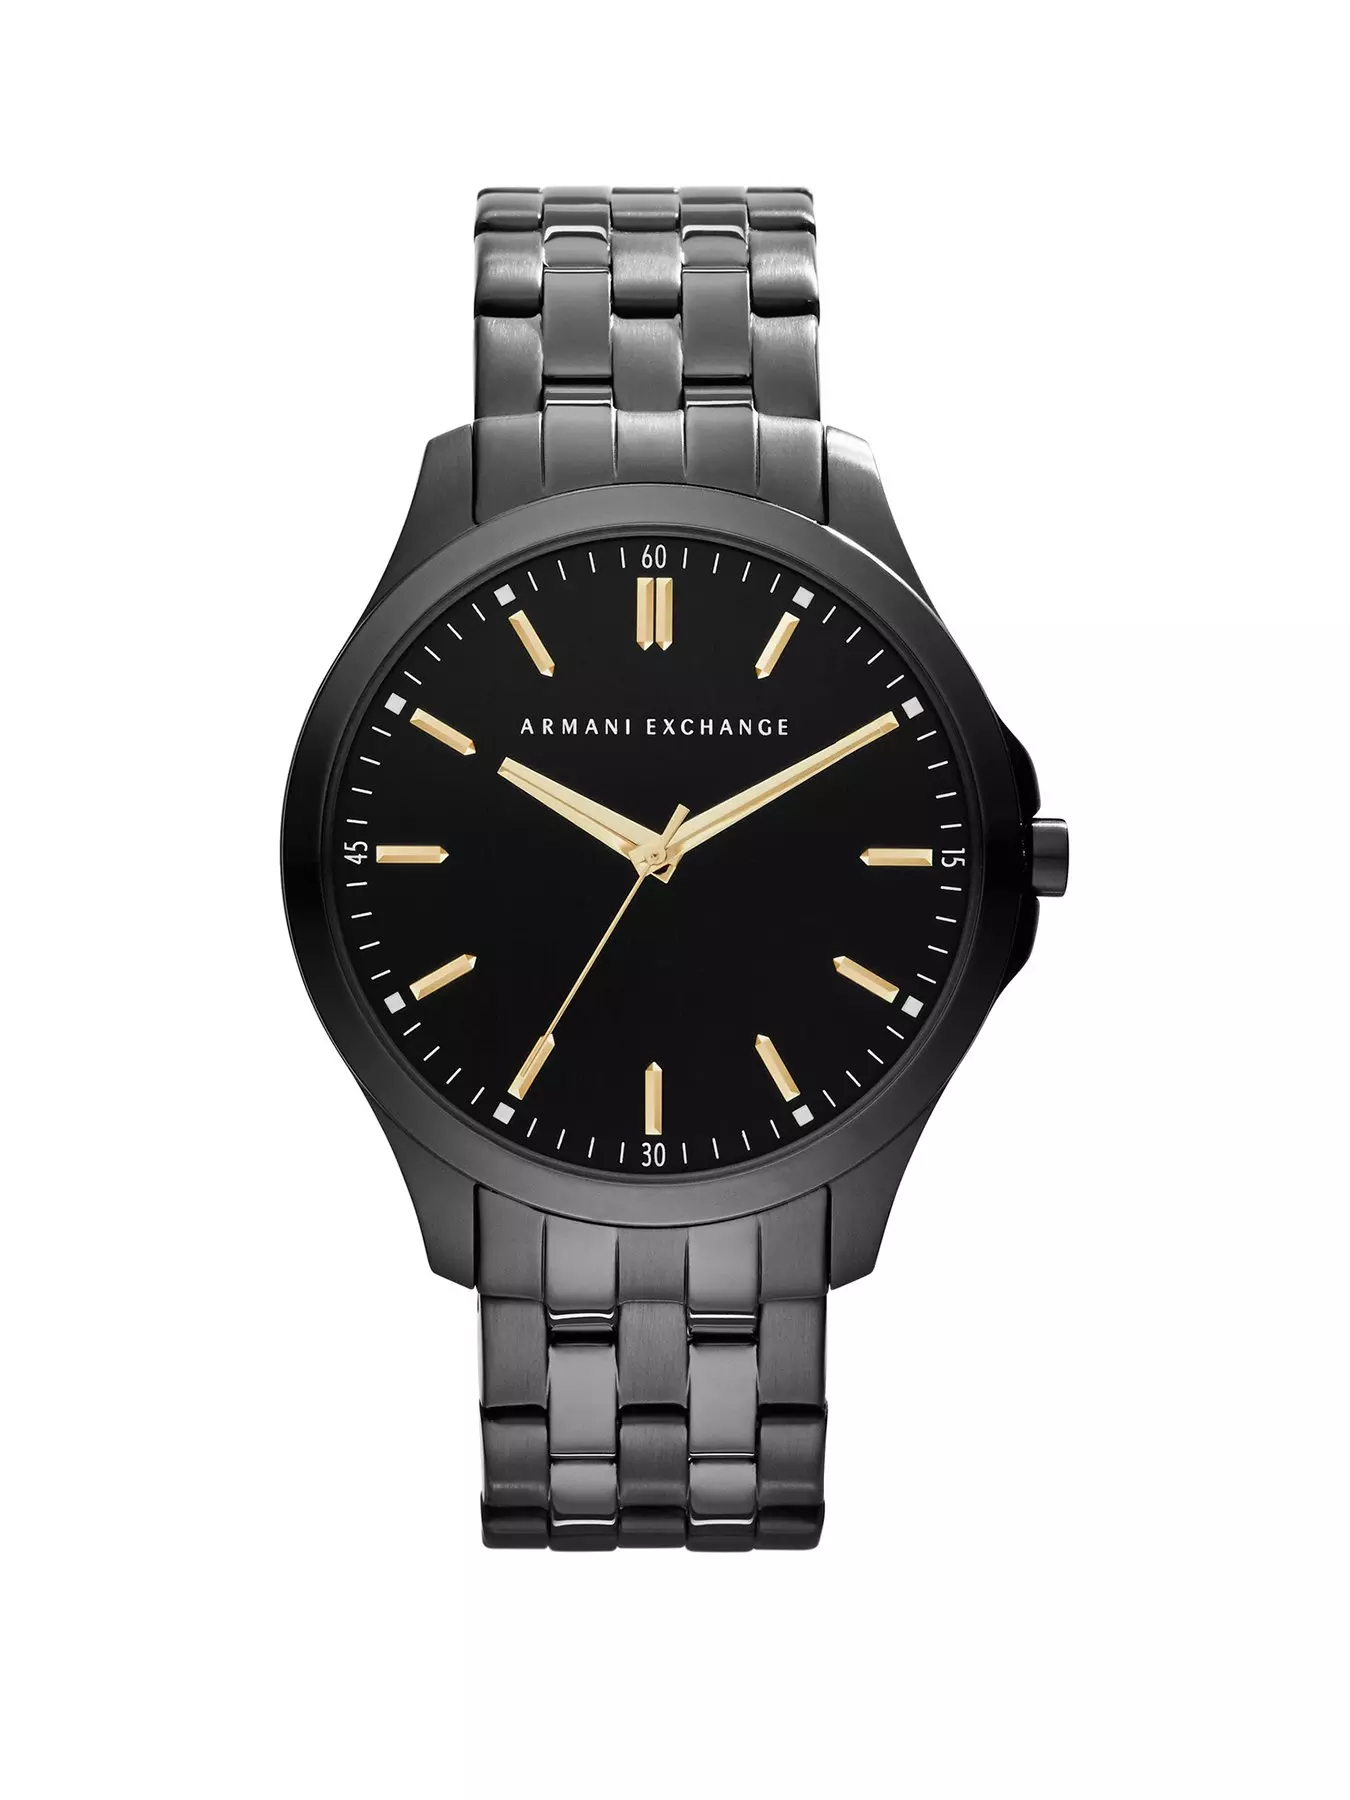 Mens | Armani exchange | Mens watches | Gifts & jewellery 